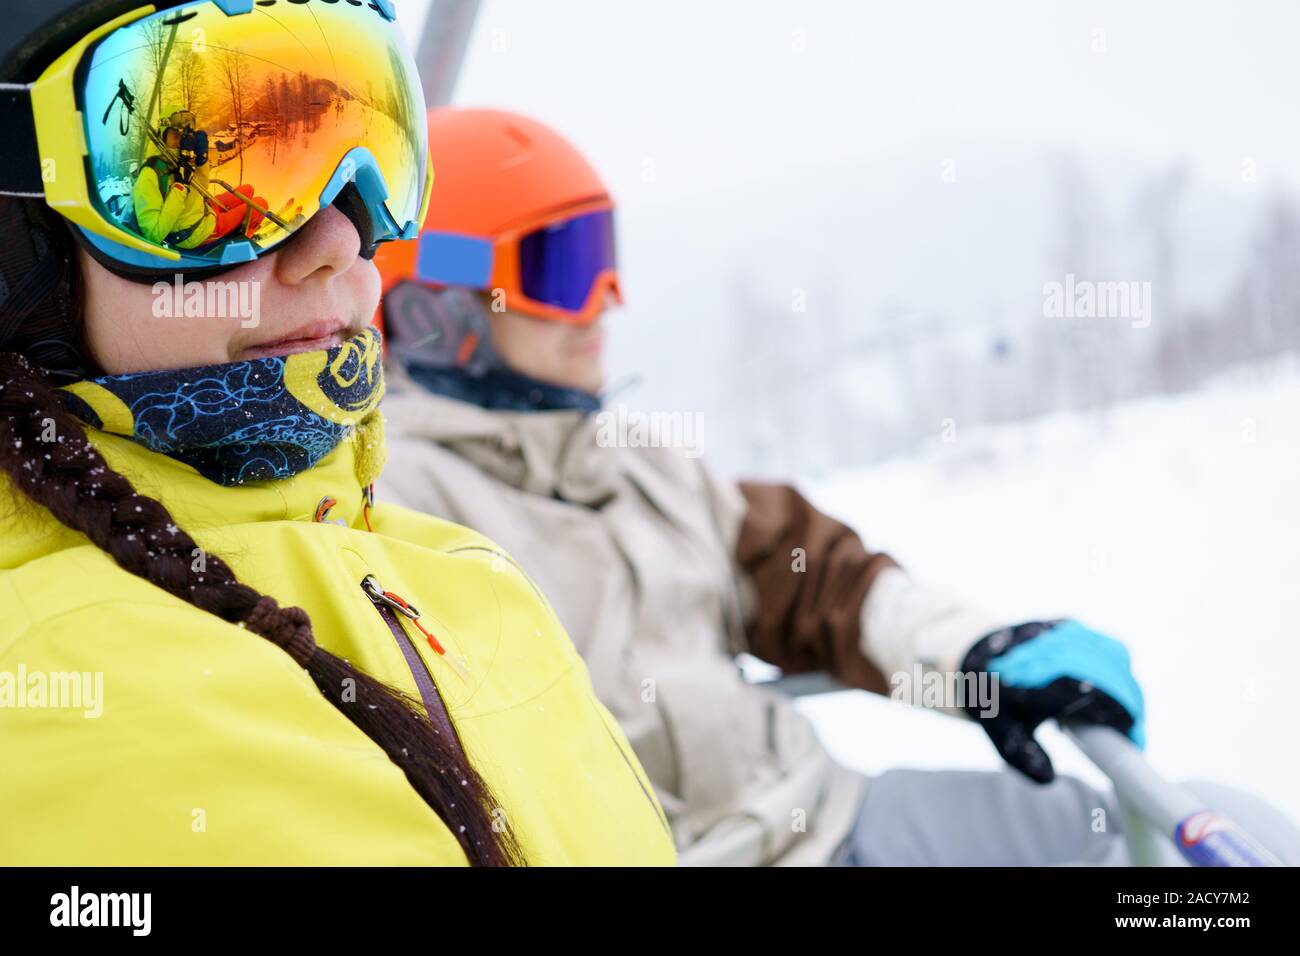 Couple sitting on chairlift in mountain resorts. Stock Photo